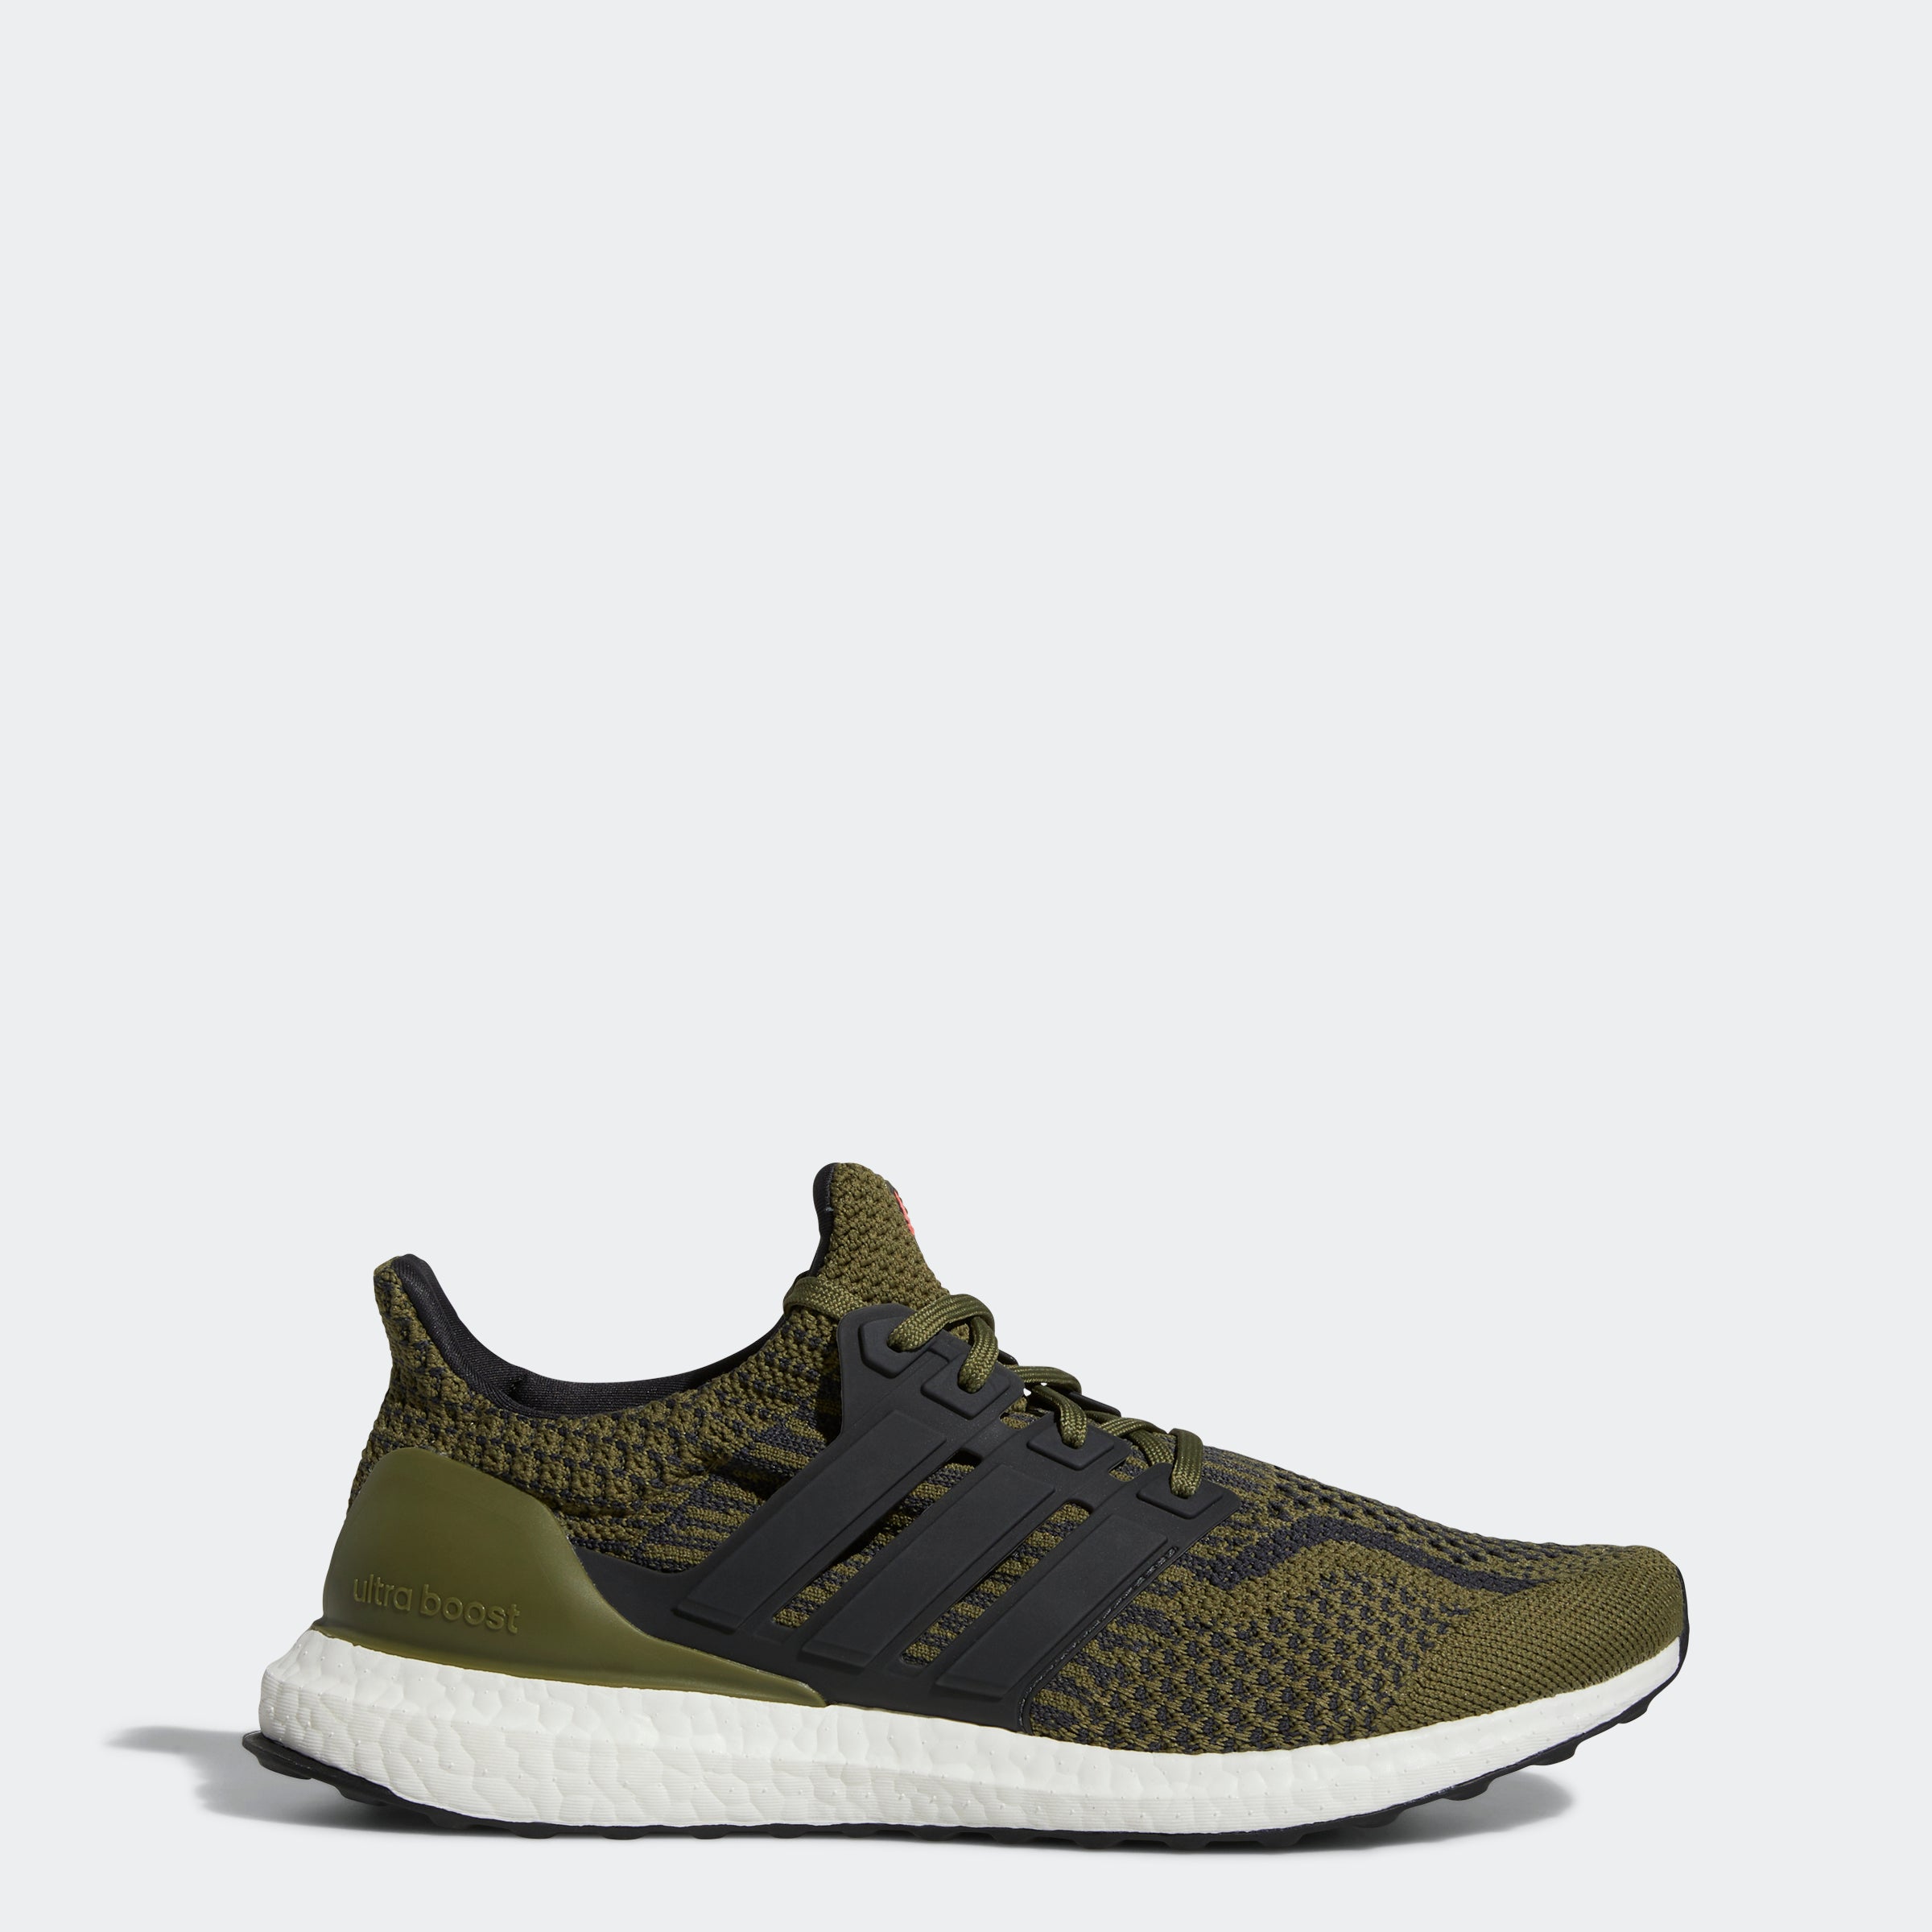 adidas Ultraboost 5.0 DNA Shoes Focus Olive Chicago Sports